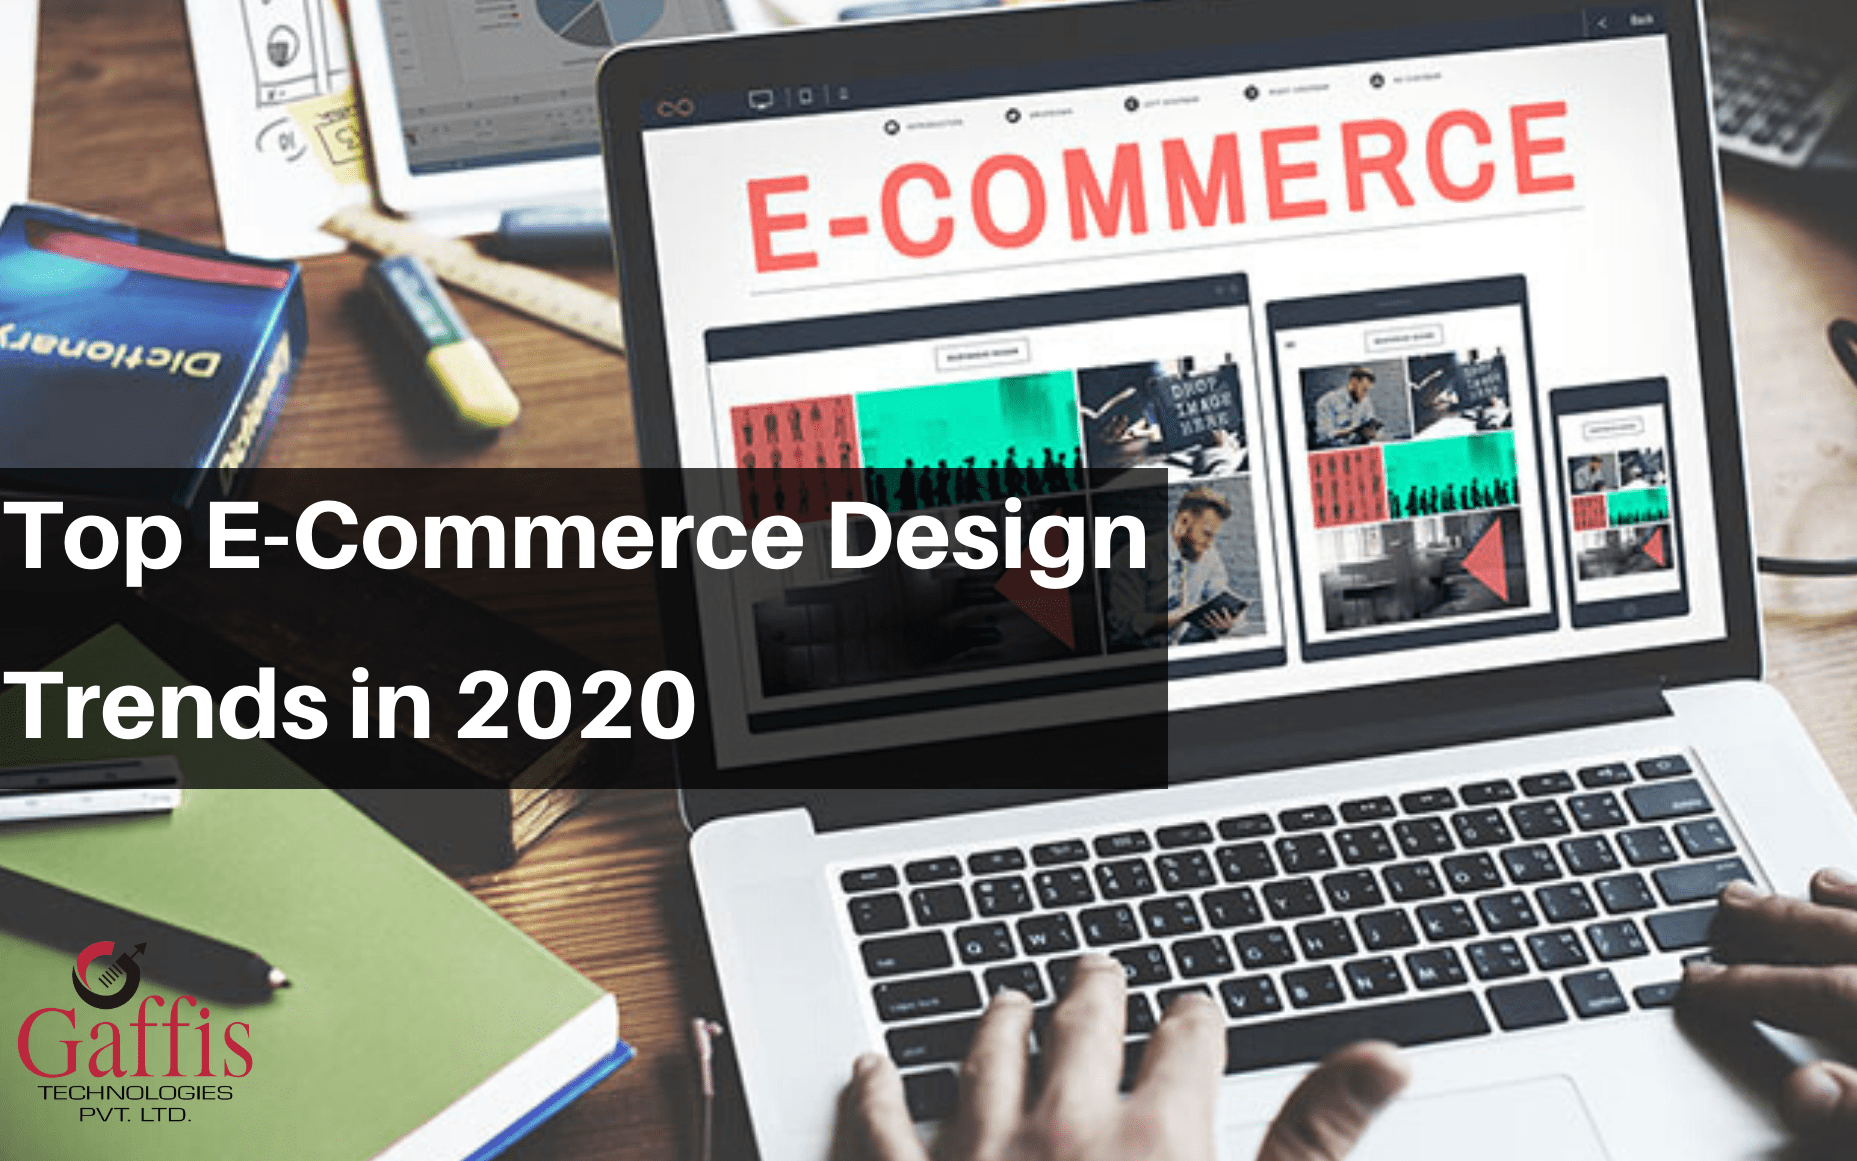 7 Ecommerce Design Trends You Need to Know in 2020